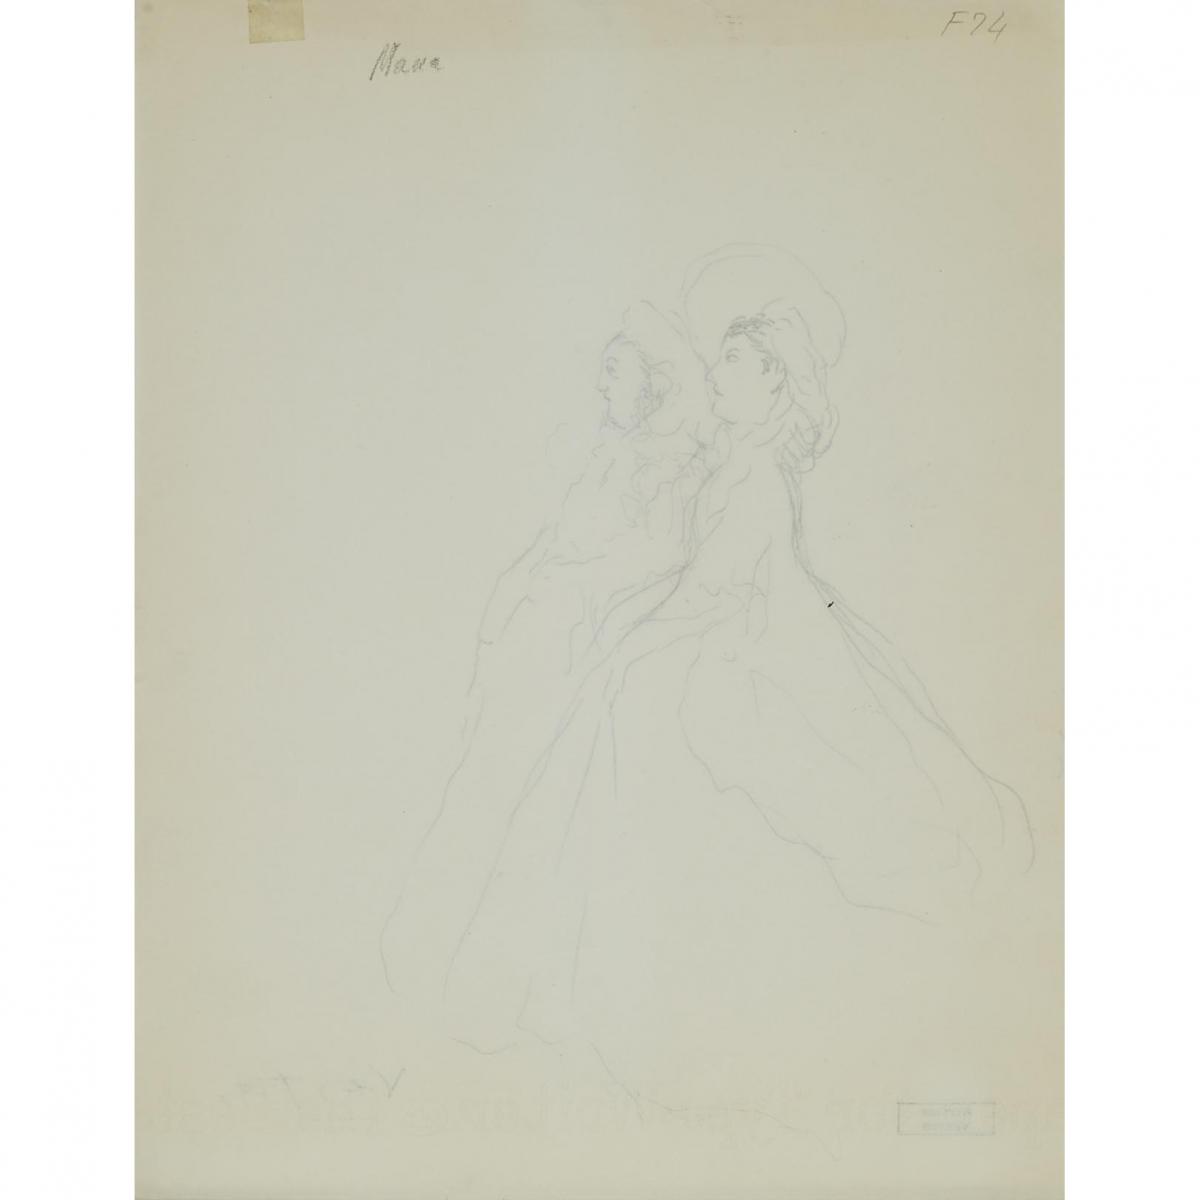 Various Artists, COLLECTION OF DRAWINGS, SOME 1956, Auguste François (Marie) Gorguet (1862-1927), Fr - Image 6 of 17